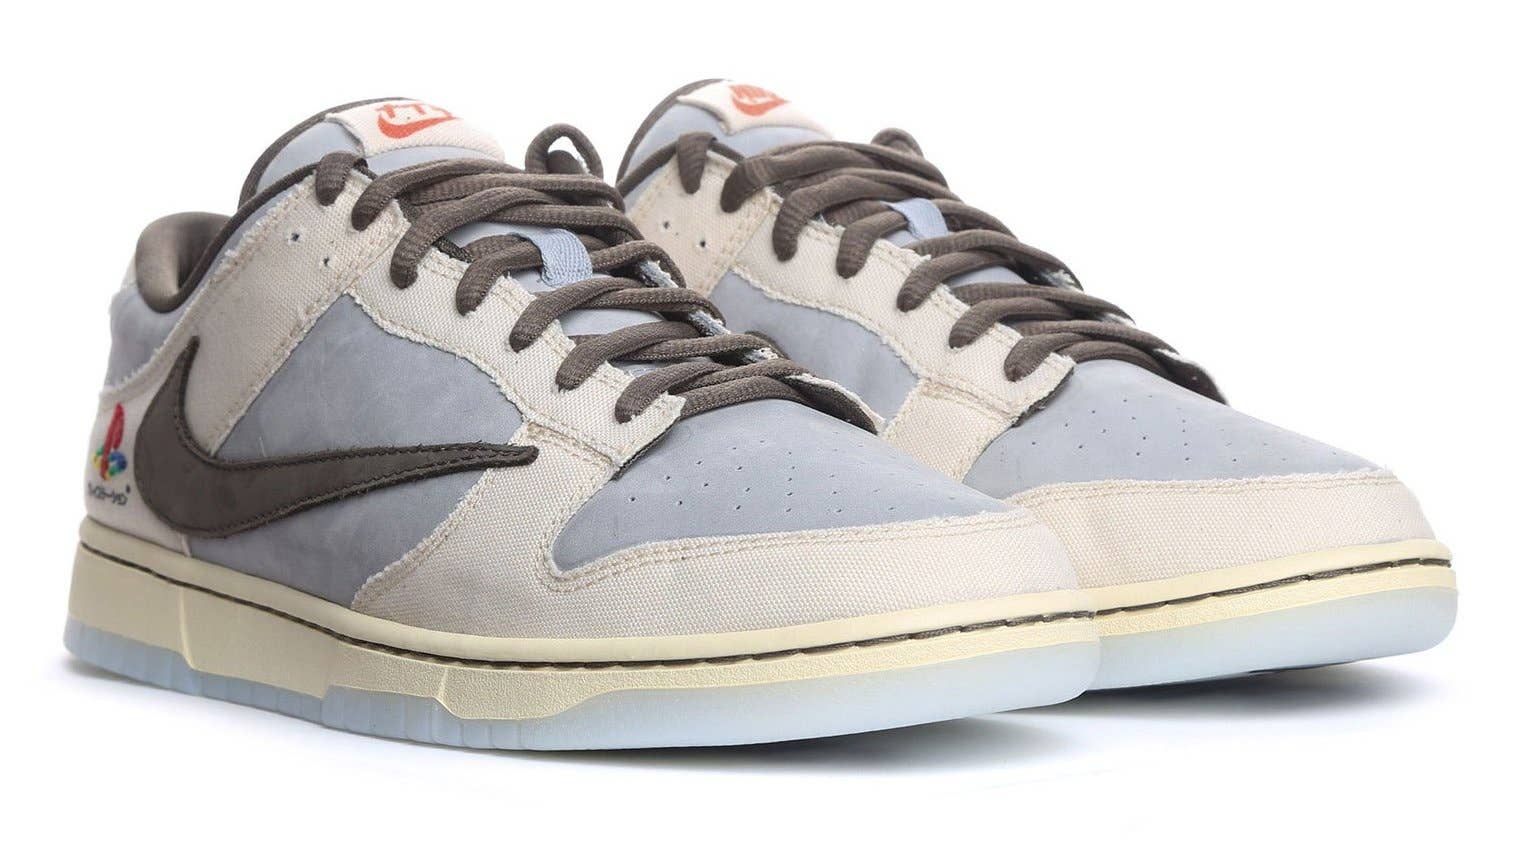 Much Travis Scott's PlayStation Nike Dunks Reselling For? Aren't Complex